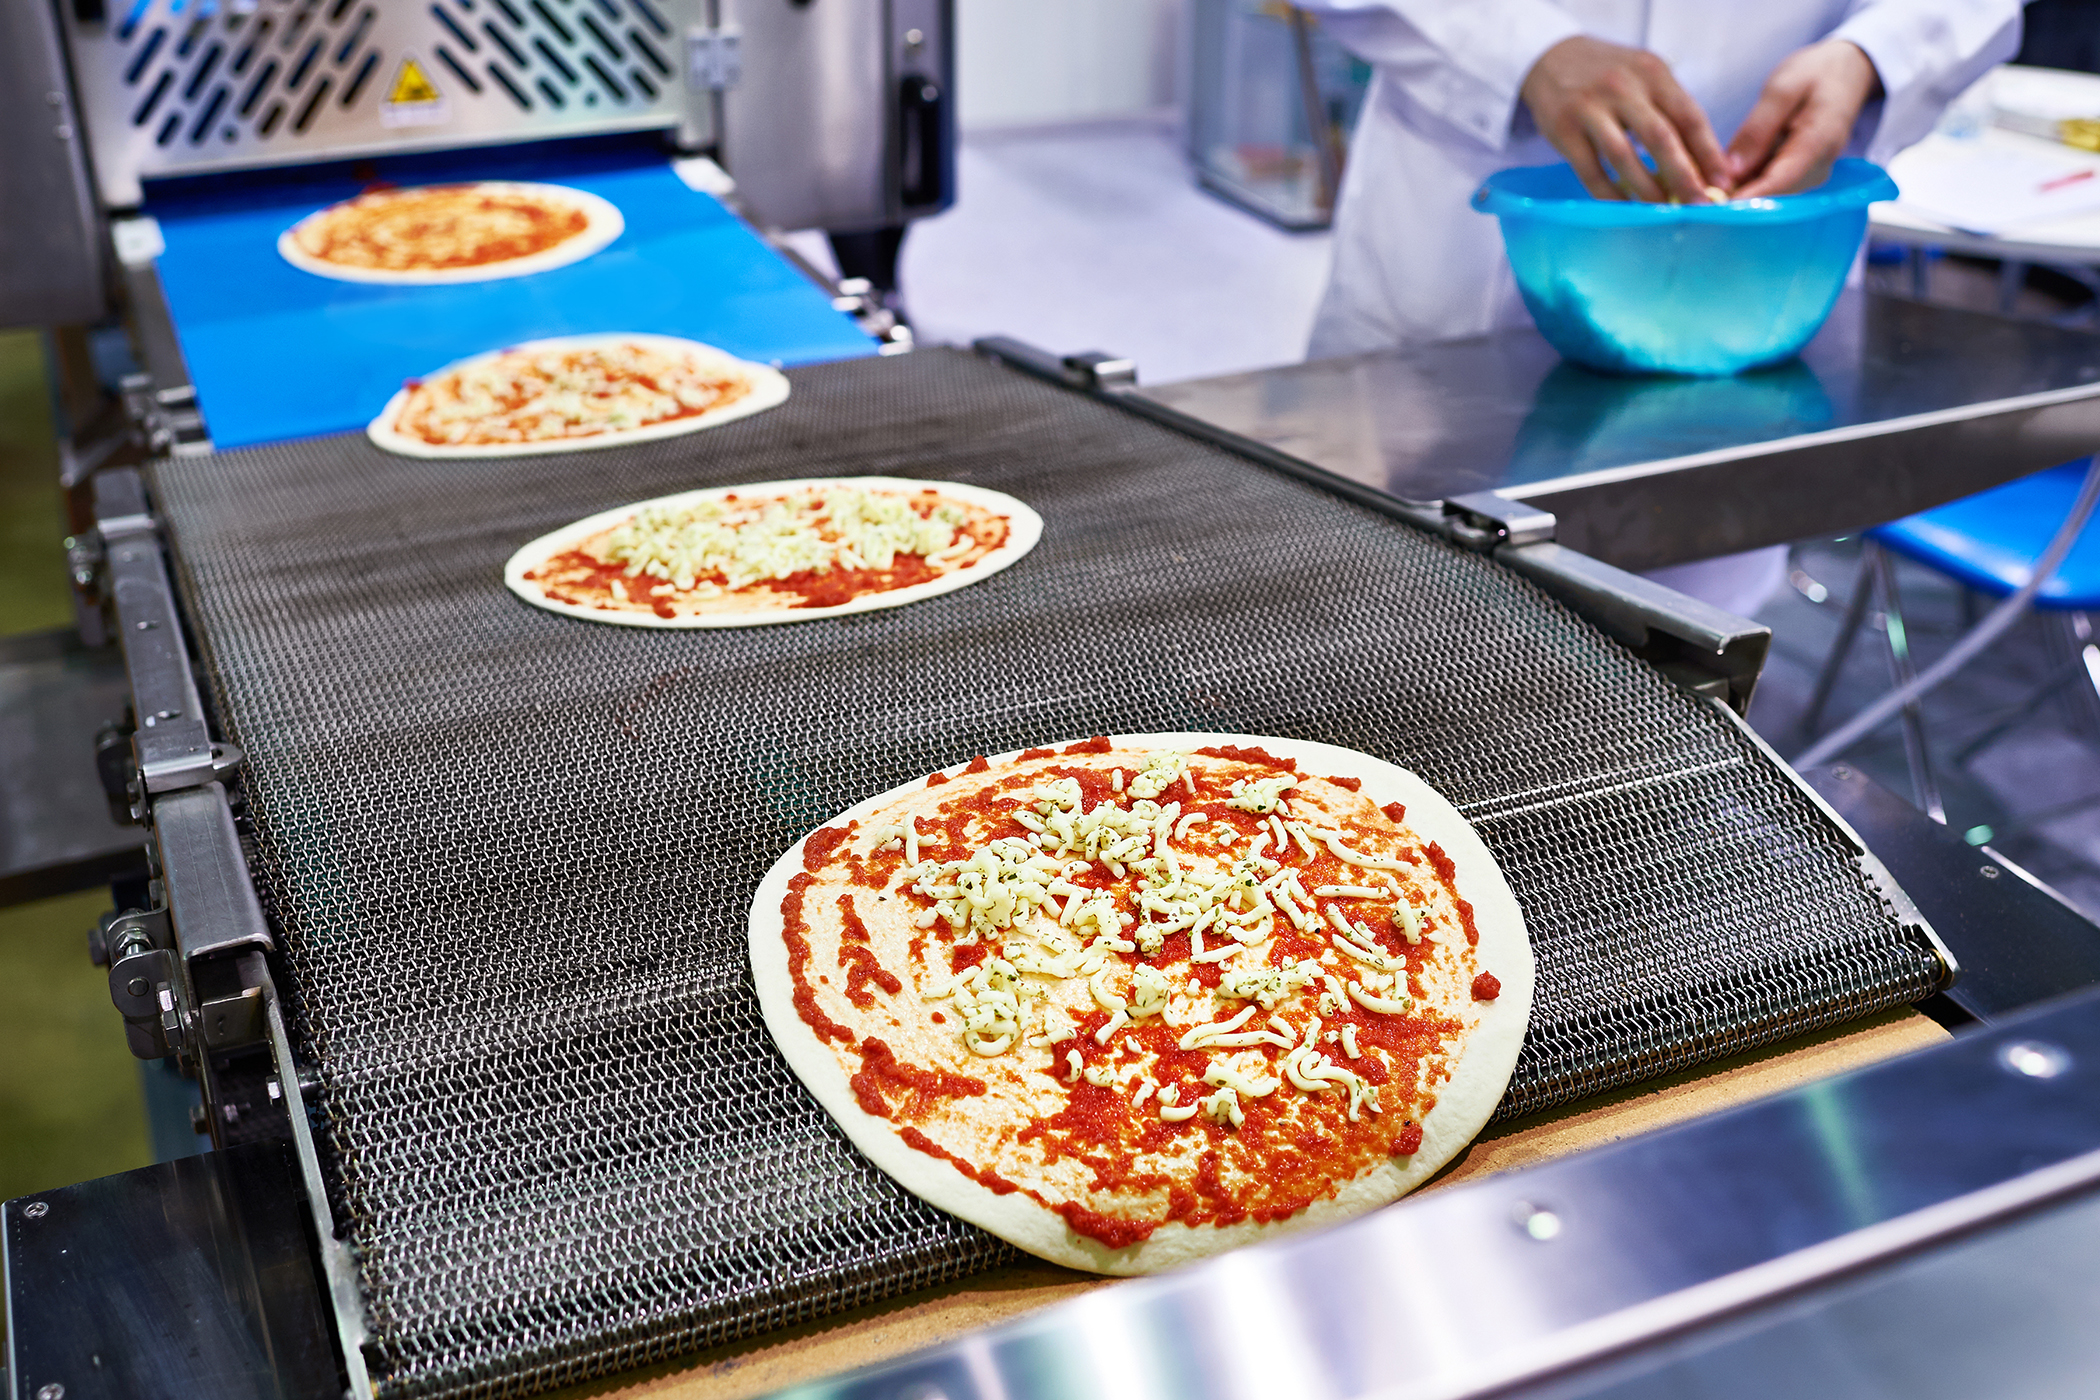 Mitsubishi Electric’s upgrades to the Bakkavor Pizza production line not only successfully addressed Control Freaks’ challenges, but exceeded expectations too. [Source: Mitsubishi Electric Europe B.V.]